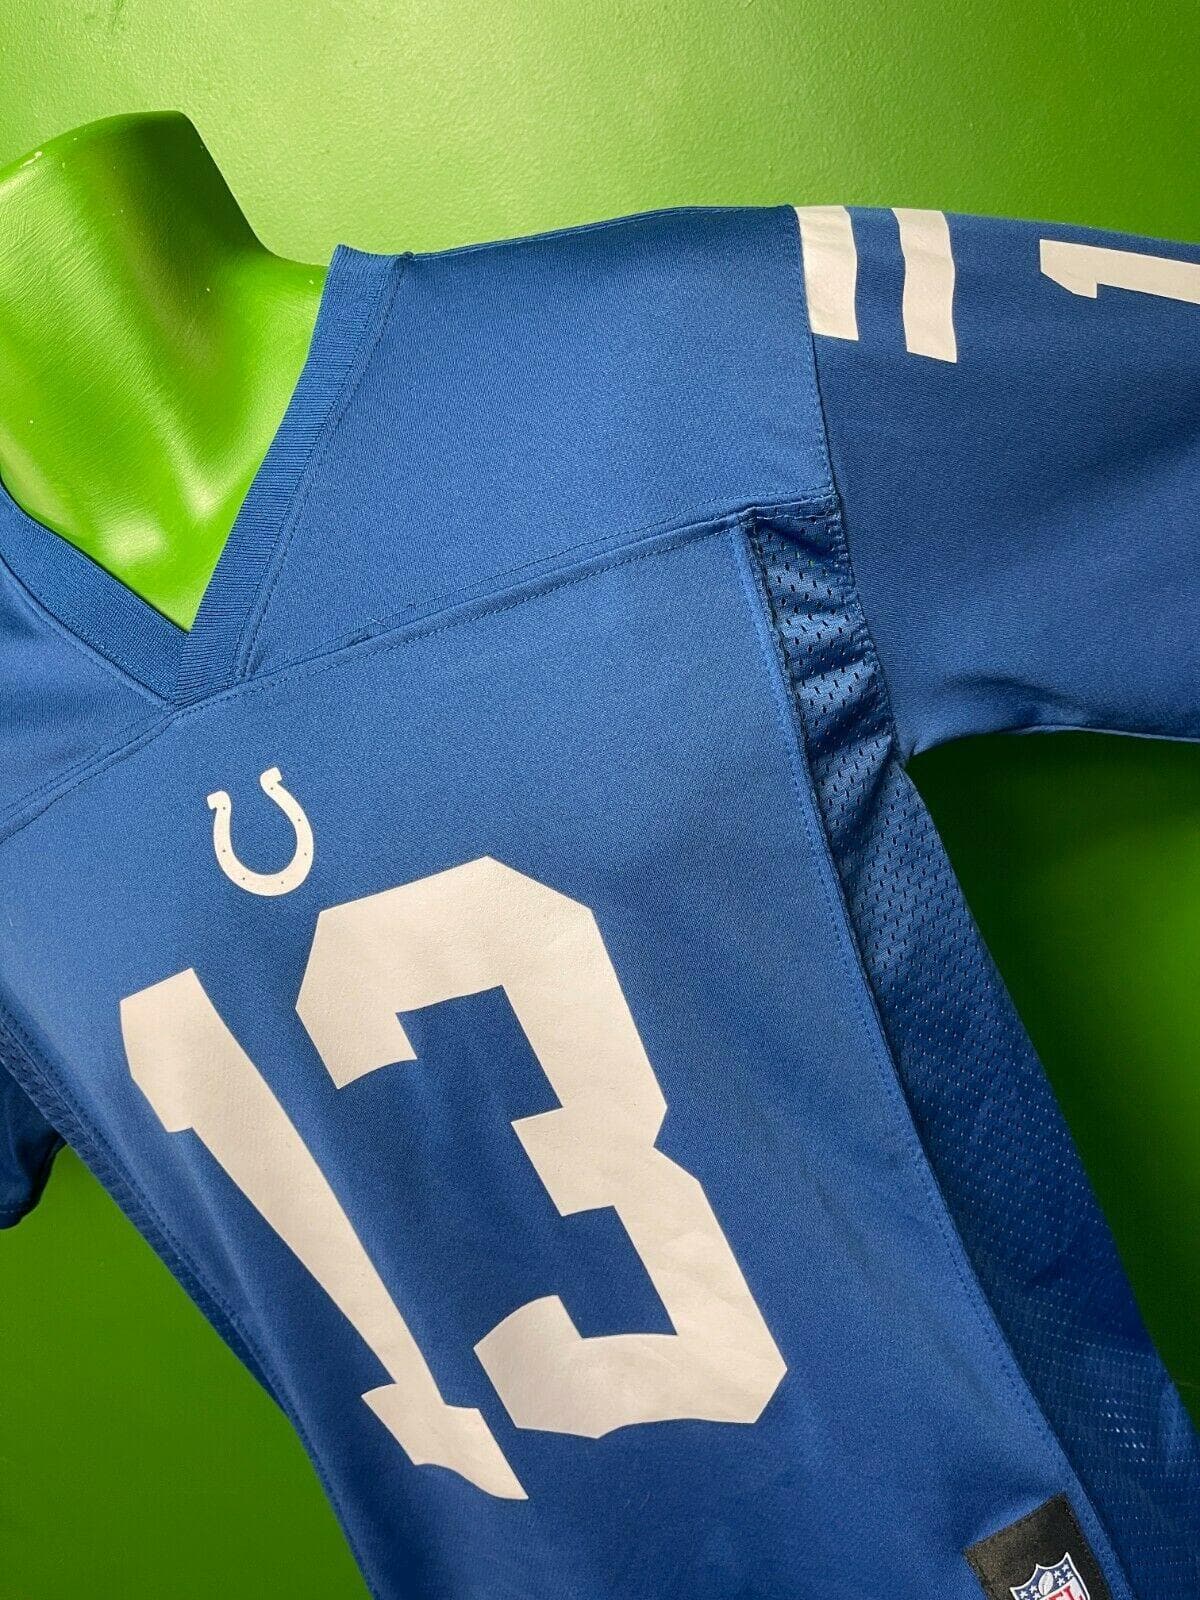 NFL Indianapolis Colts T Y Hilton #13 Jersey Youth Medium 10-12